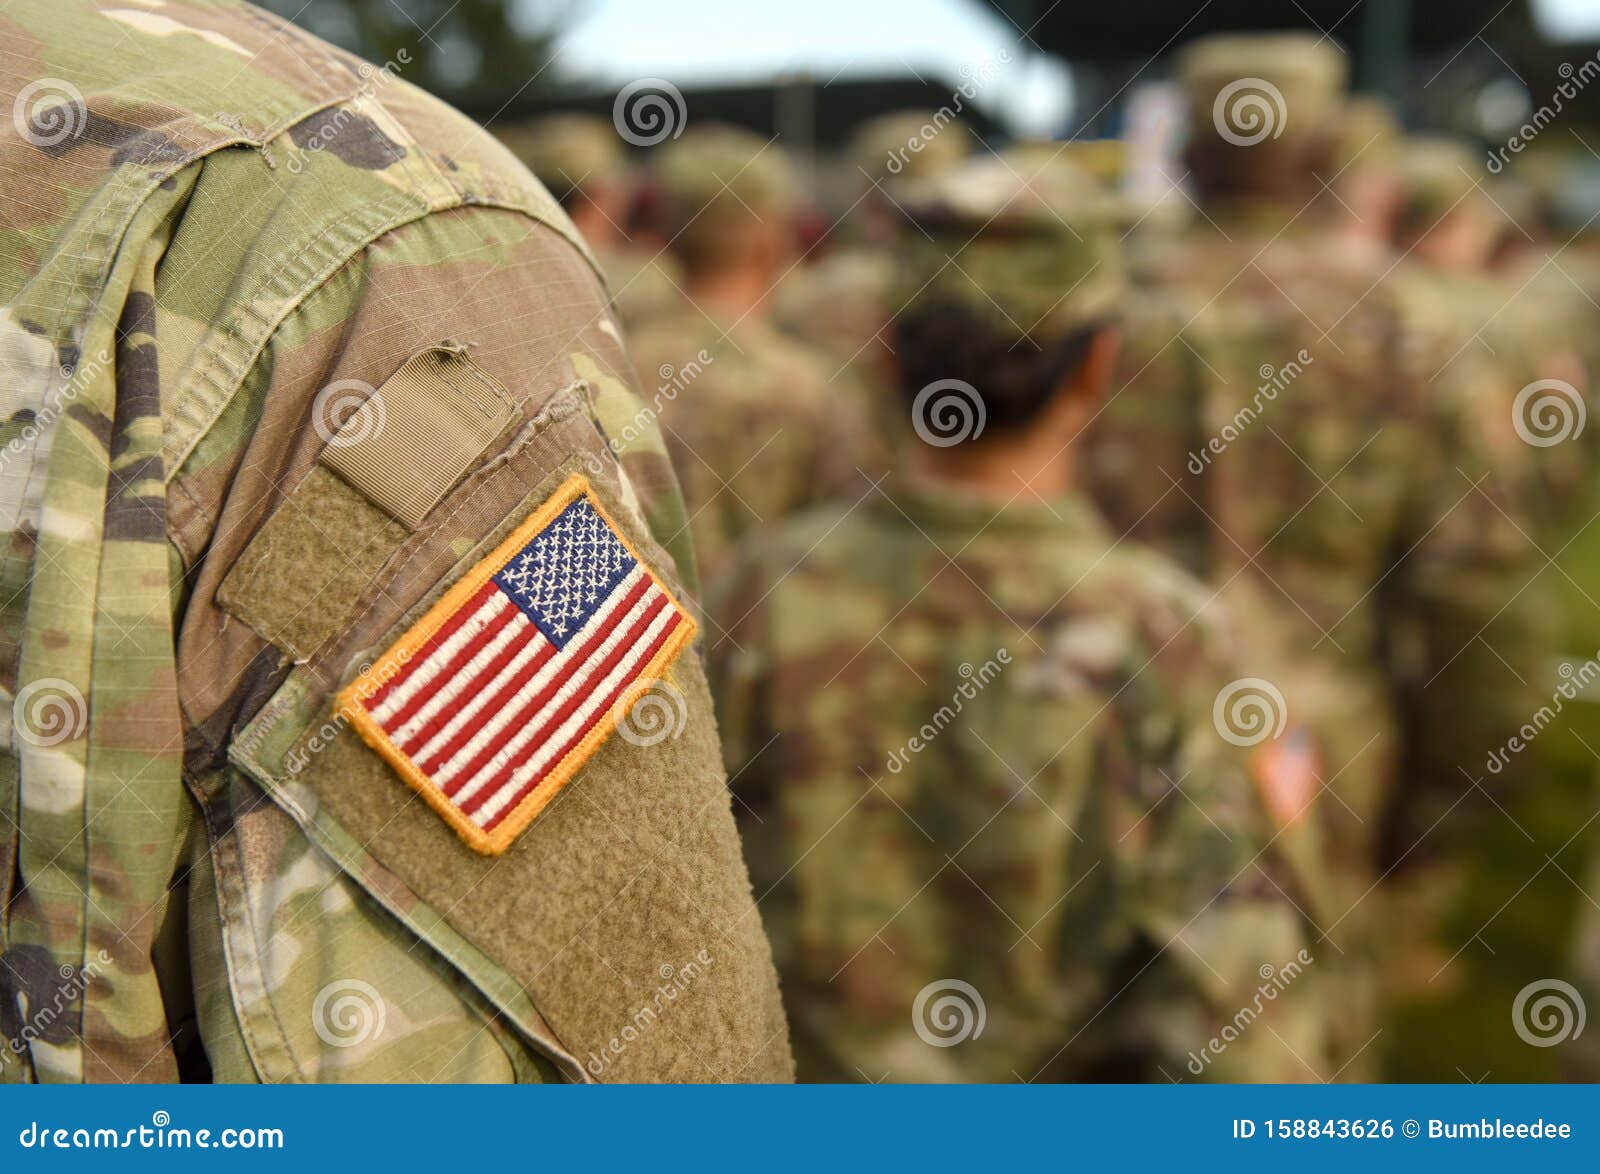 american soldiers and flag of usa on soldiers arm. us army. veteran day